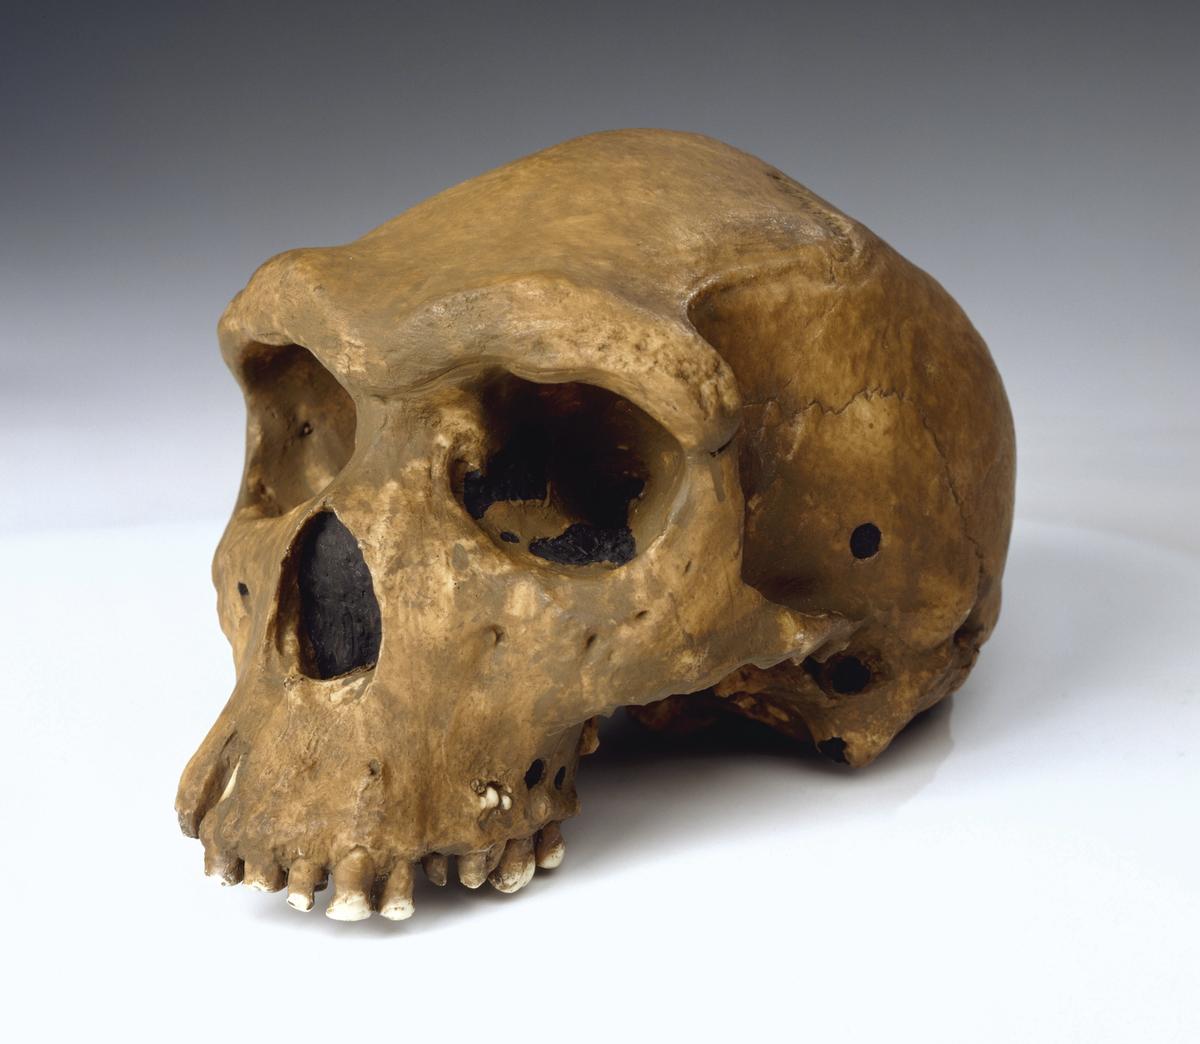 The 250,000-year-old Rhodesian Man skull was found deep in a mine in what is now Zambia in 1921 Courtesy of The Trustees of the Natural History Museum